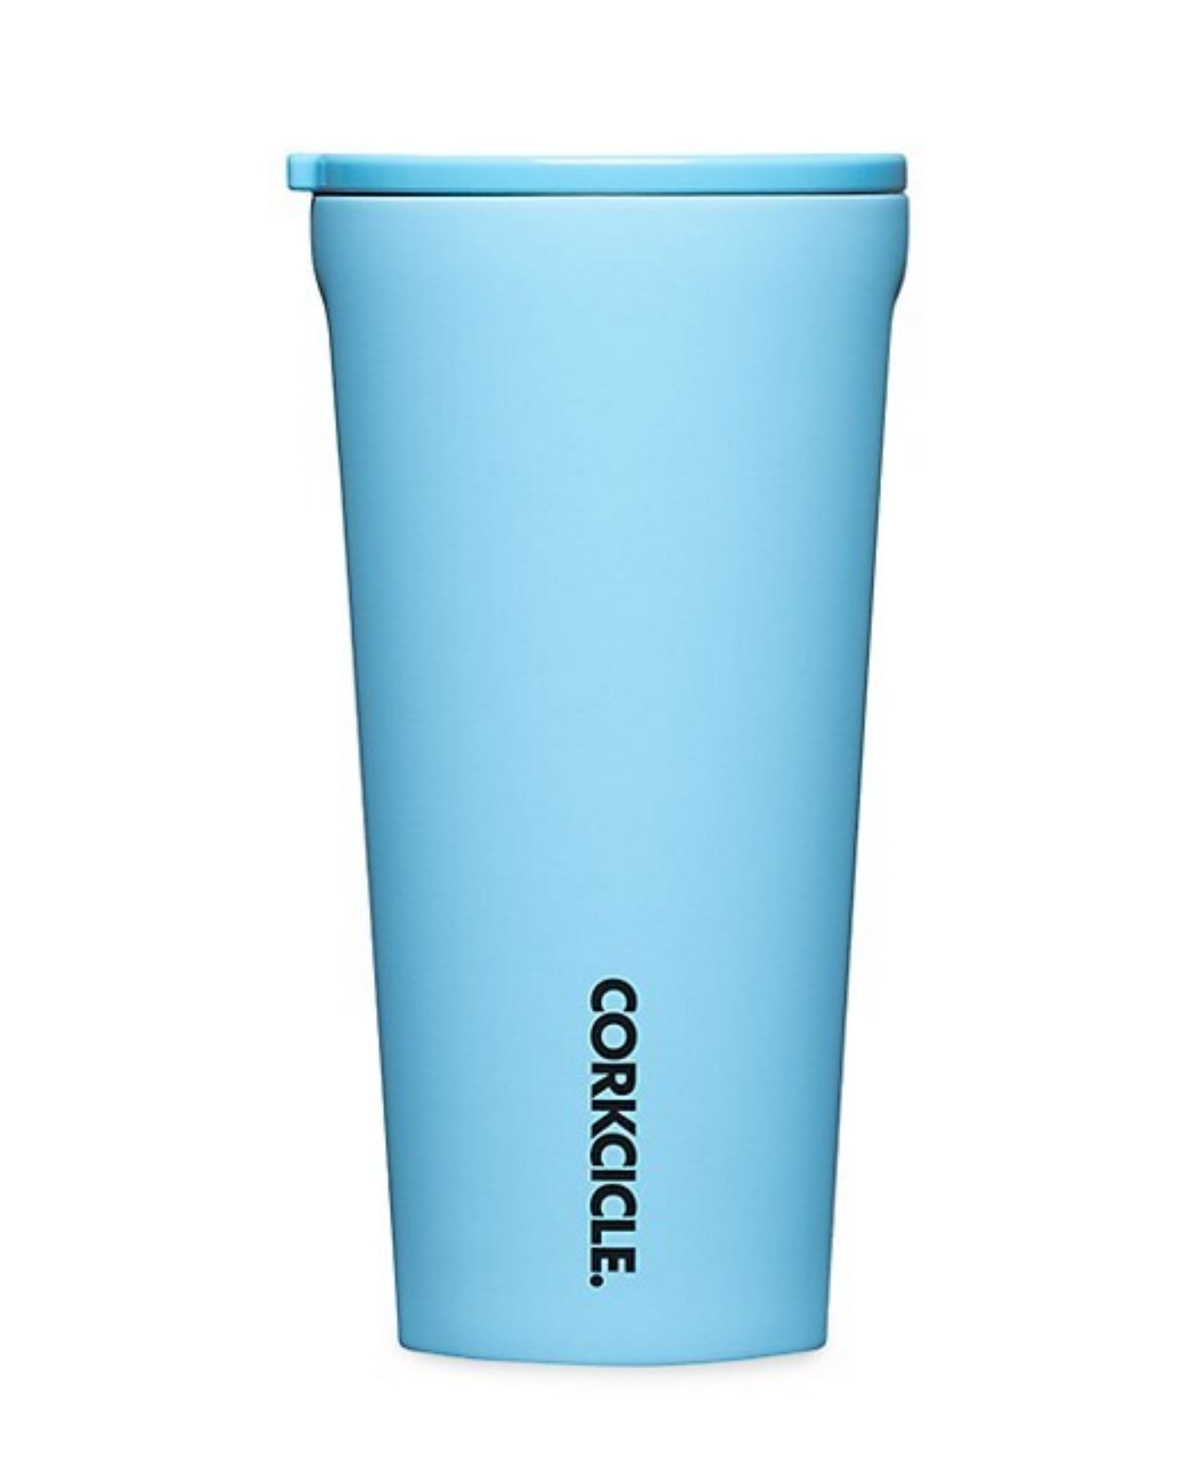 Corkcicle 16-oz. Santorini Insulated Stainless Steel Tumbler In No Color